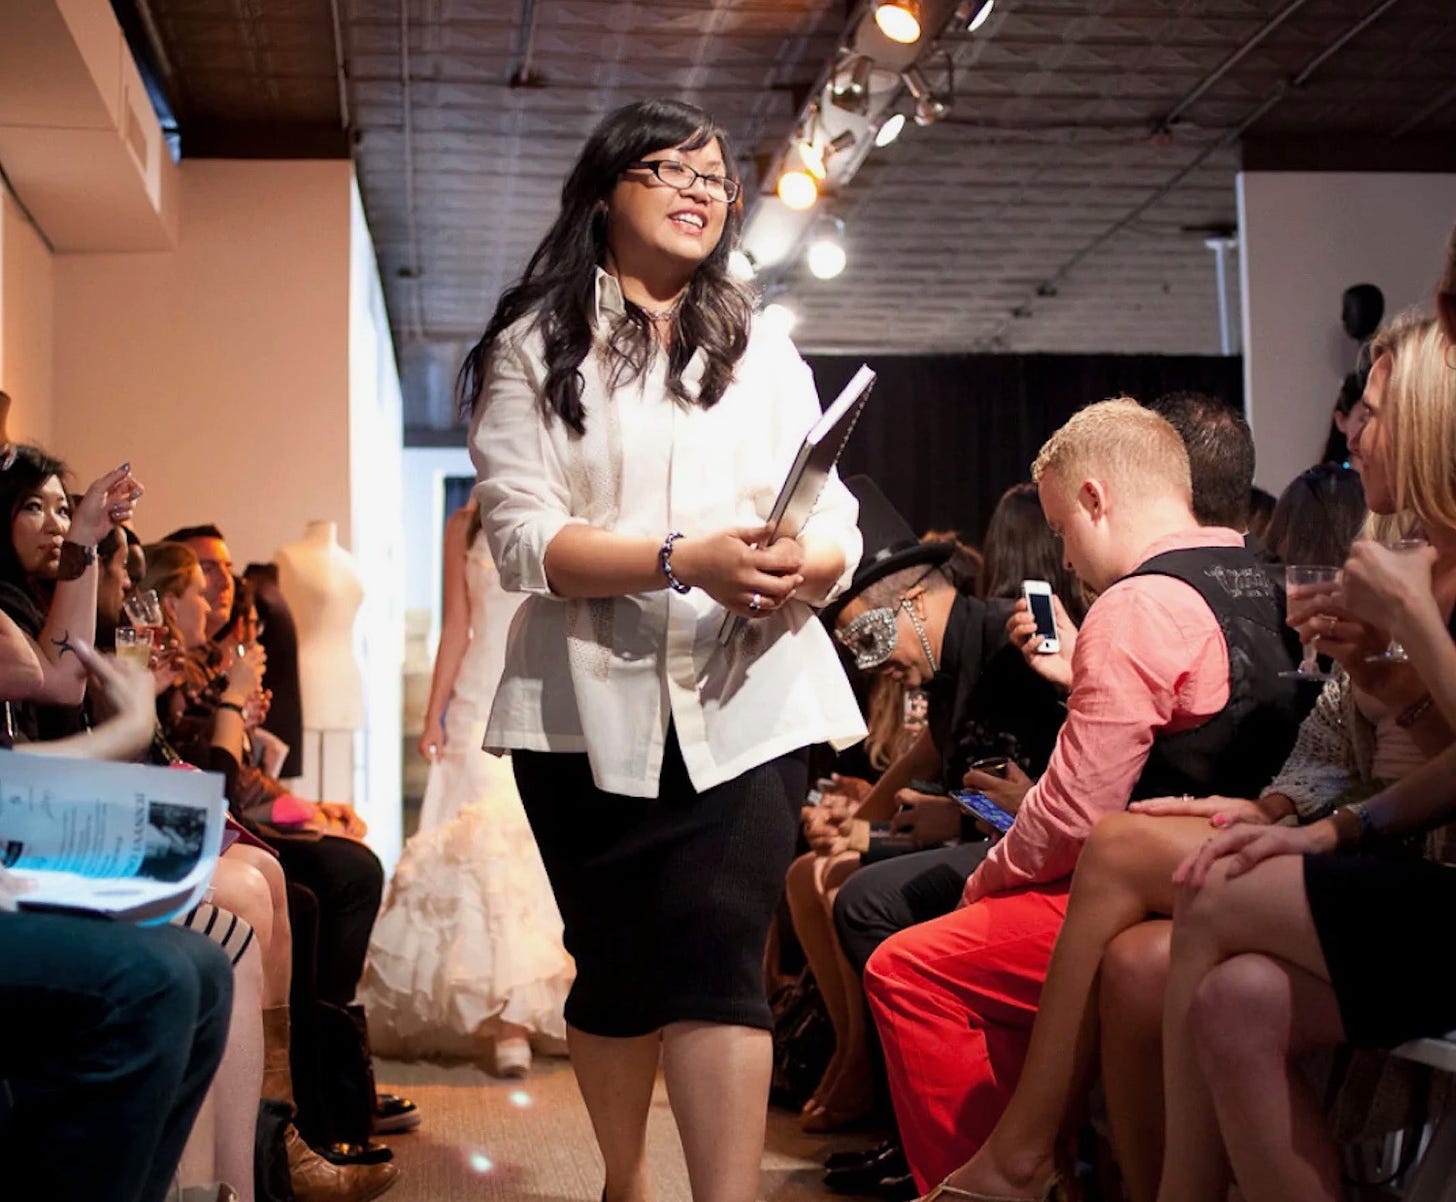 Designer Jennyvi Dizon walks in a very crowded New York Fashion Week show, she's smiling and holding a large book. 